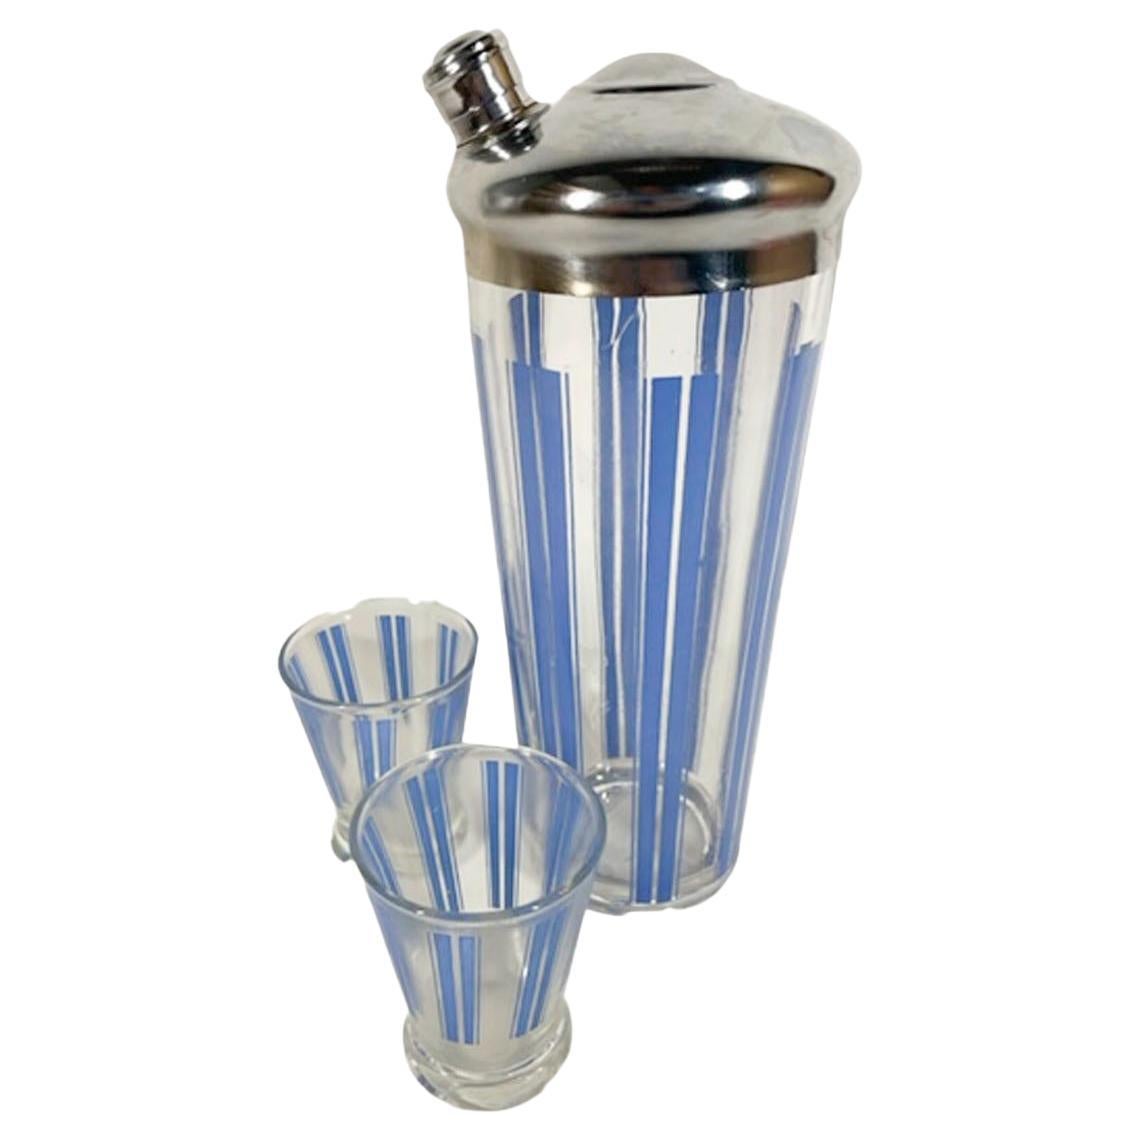 Three Piece Art Deco Cocktail Shaker Set with Blue Enamel Vertical Lines